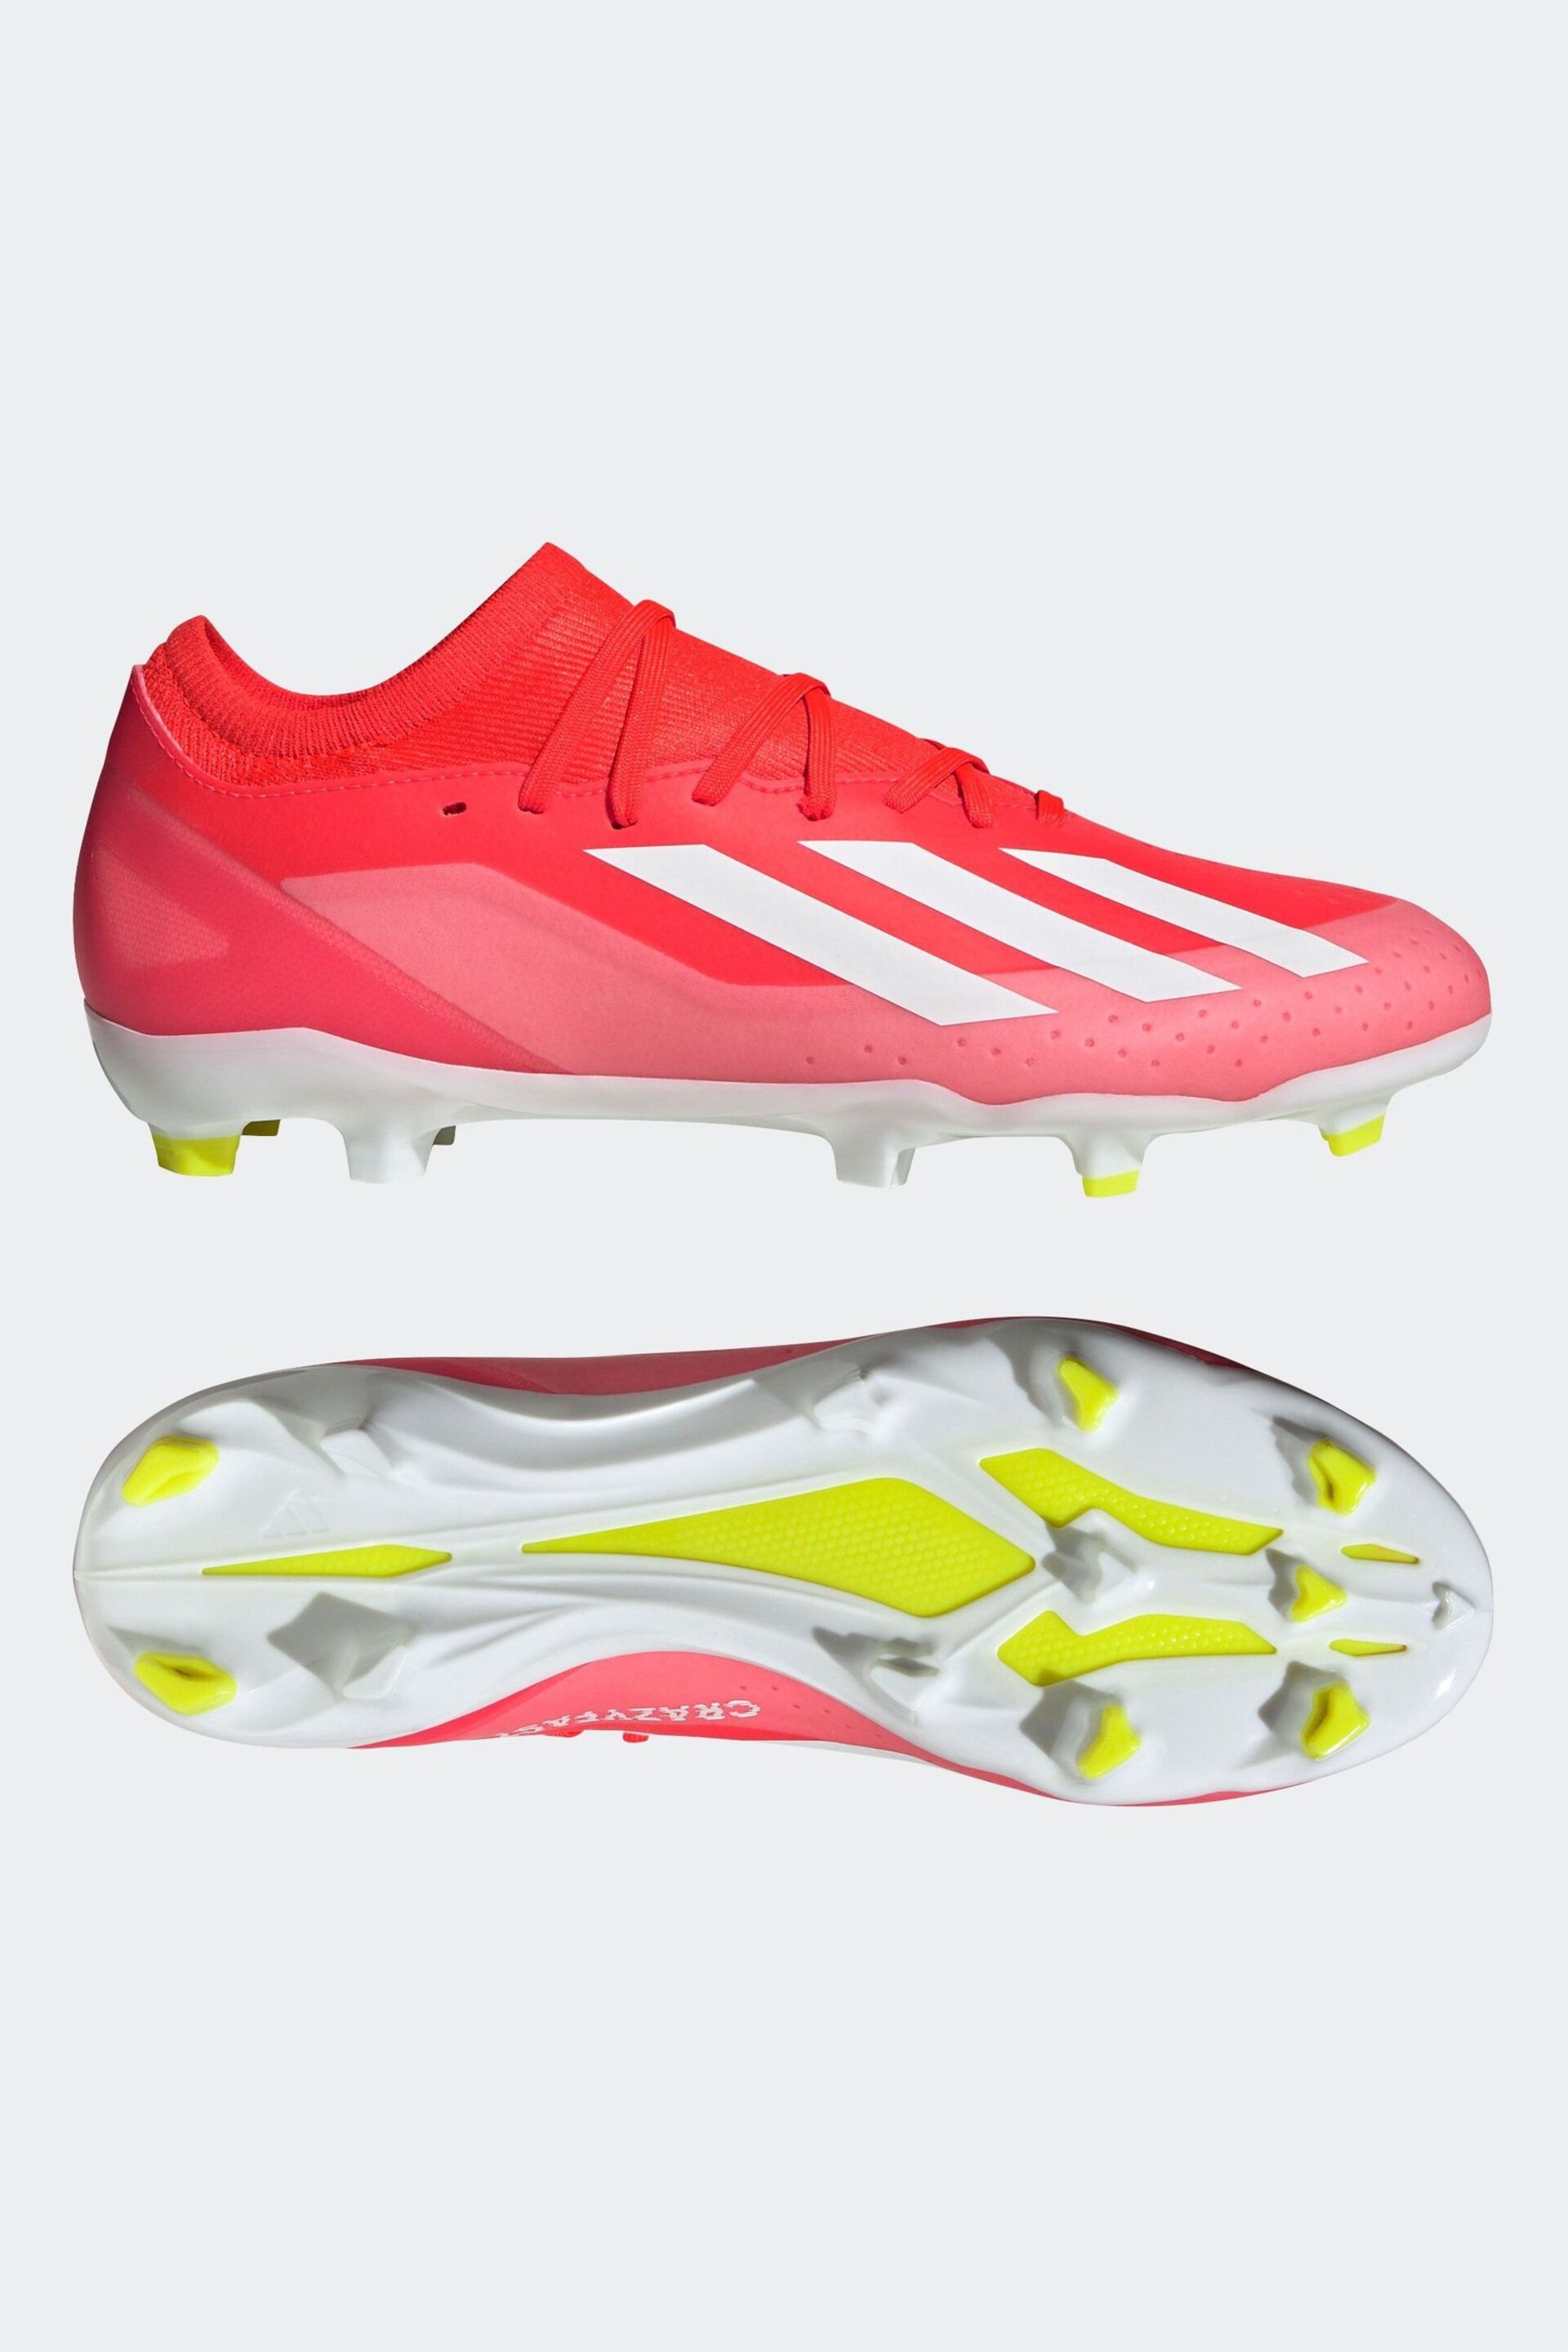 adidas Red/White Football X Crazyfast League Firm Ground Adult Boots - Image 6 of 12